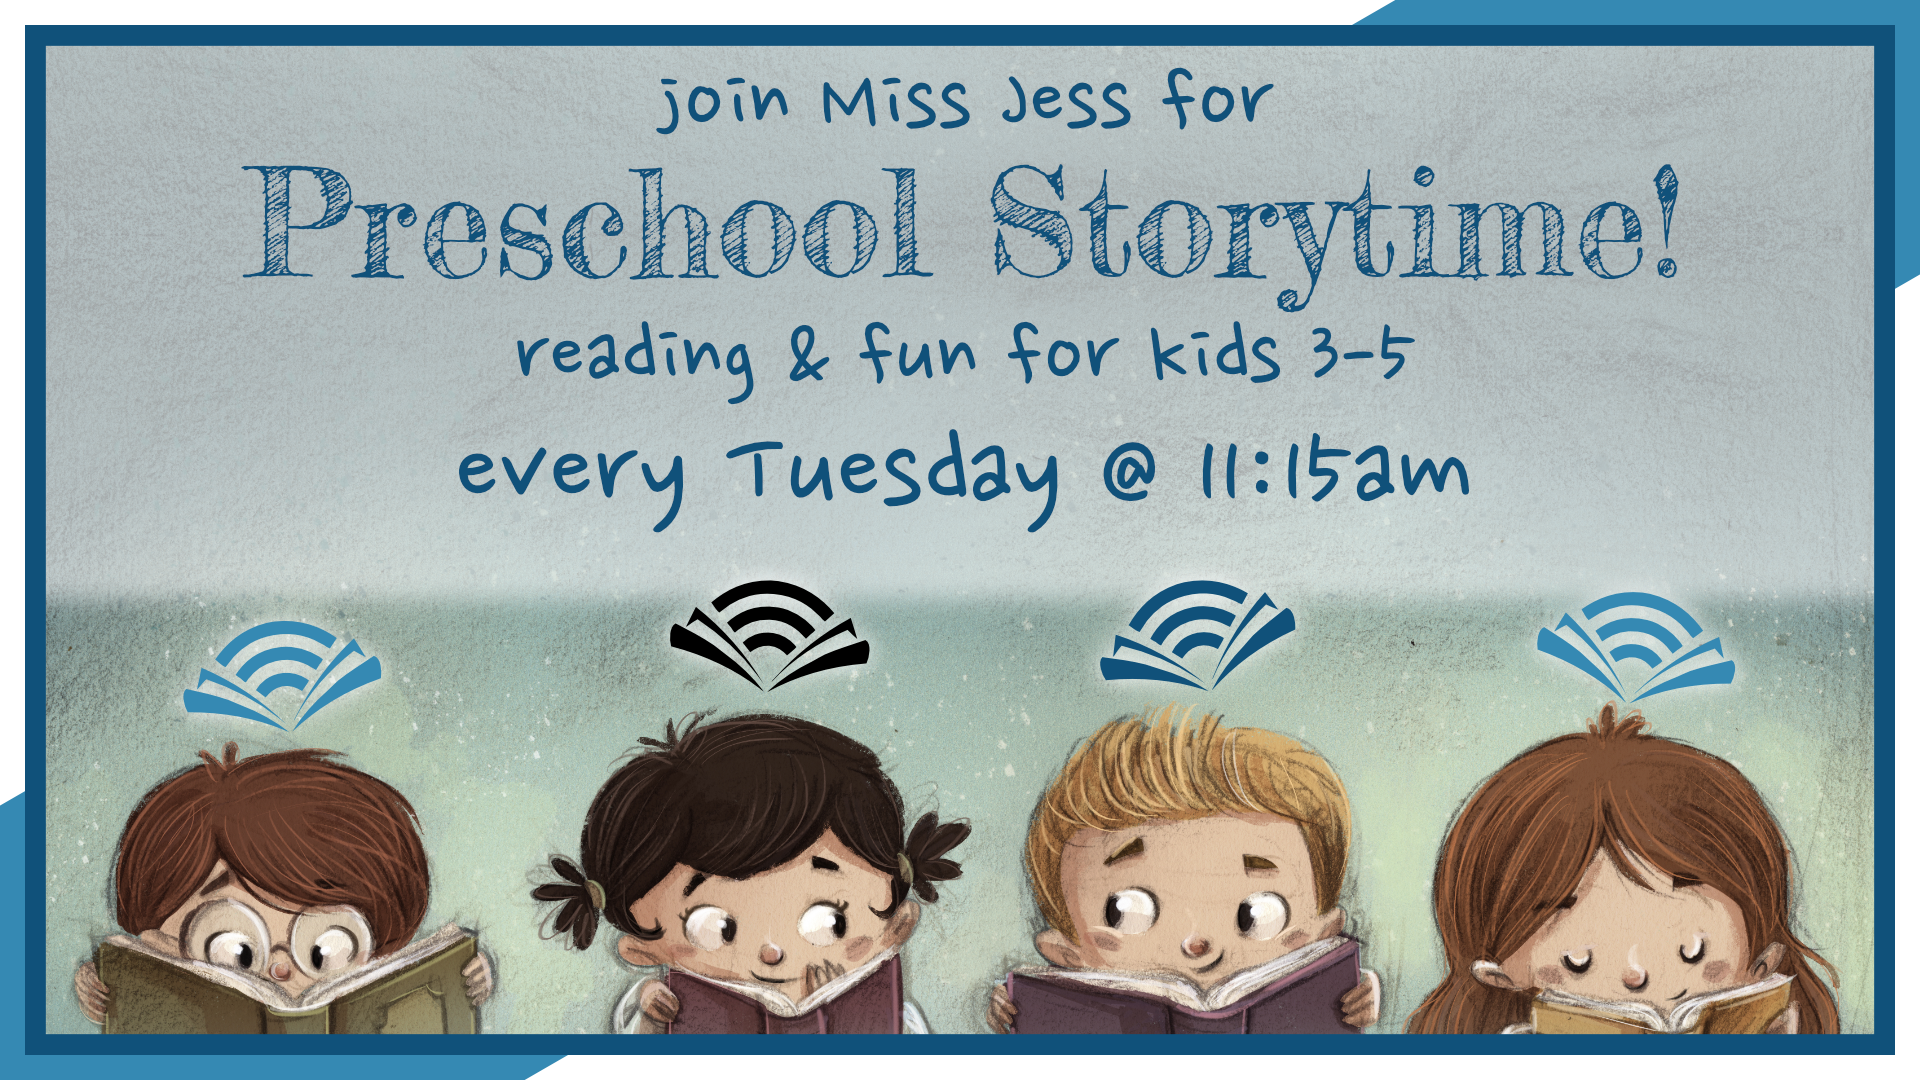 Preschool Storytime, Tuesdays weekly at 11:15am, intended for ages 3 to 5